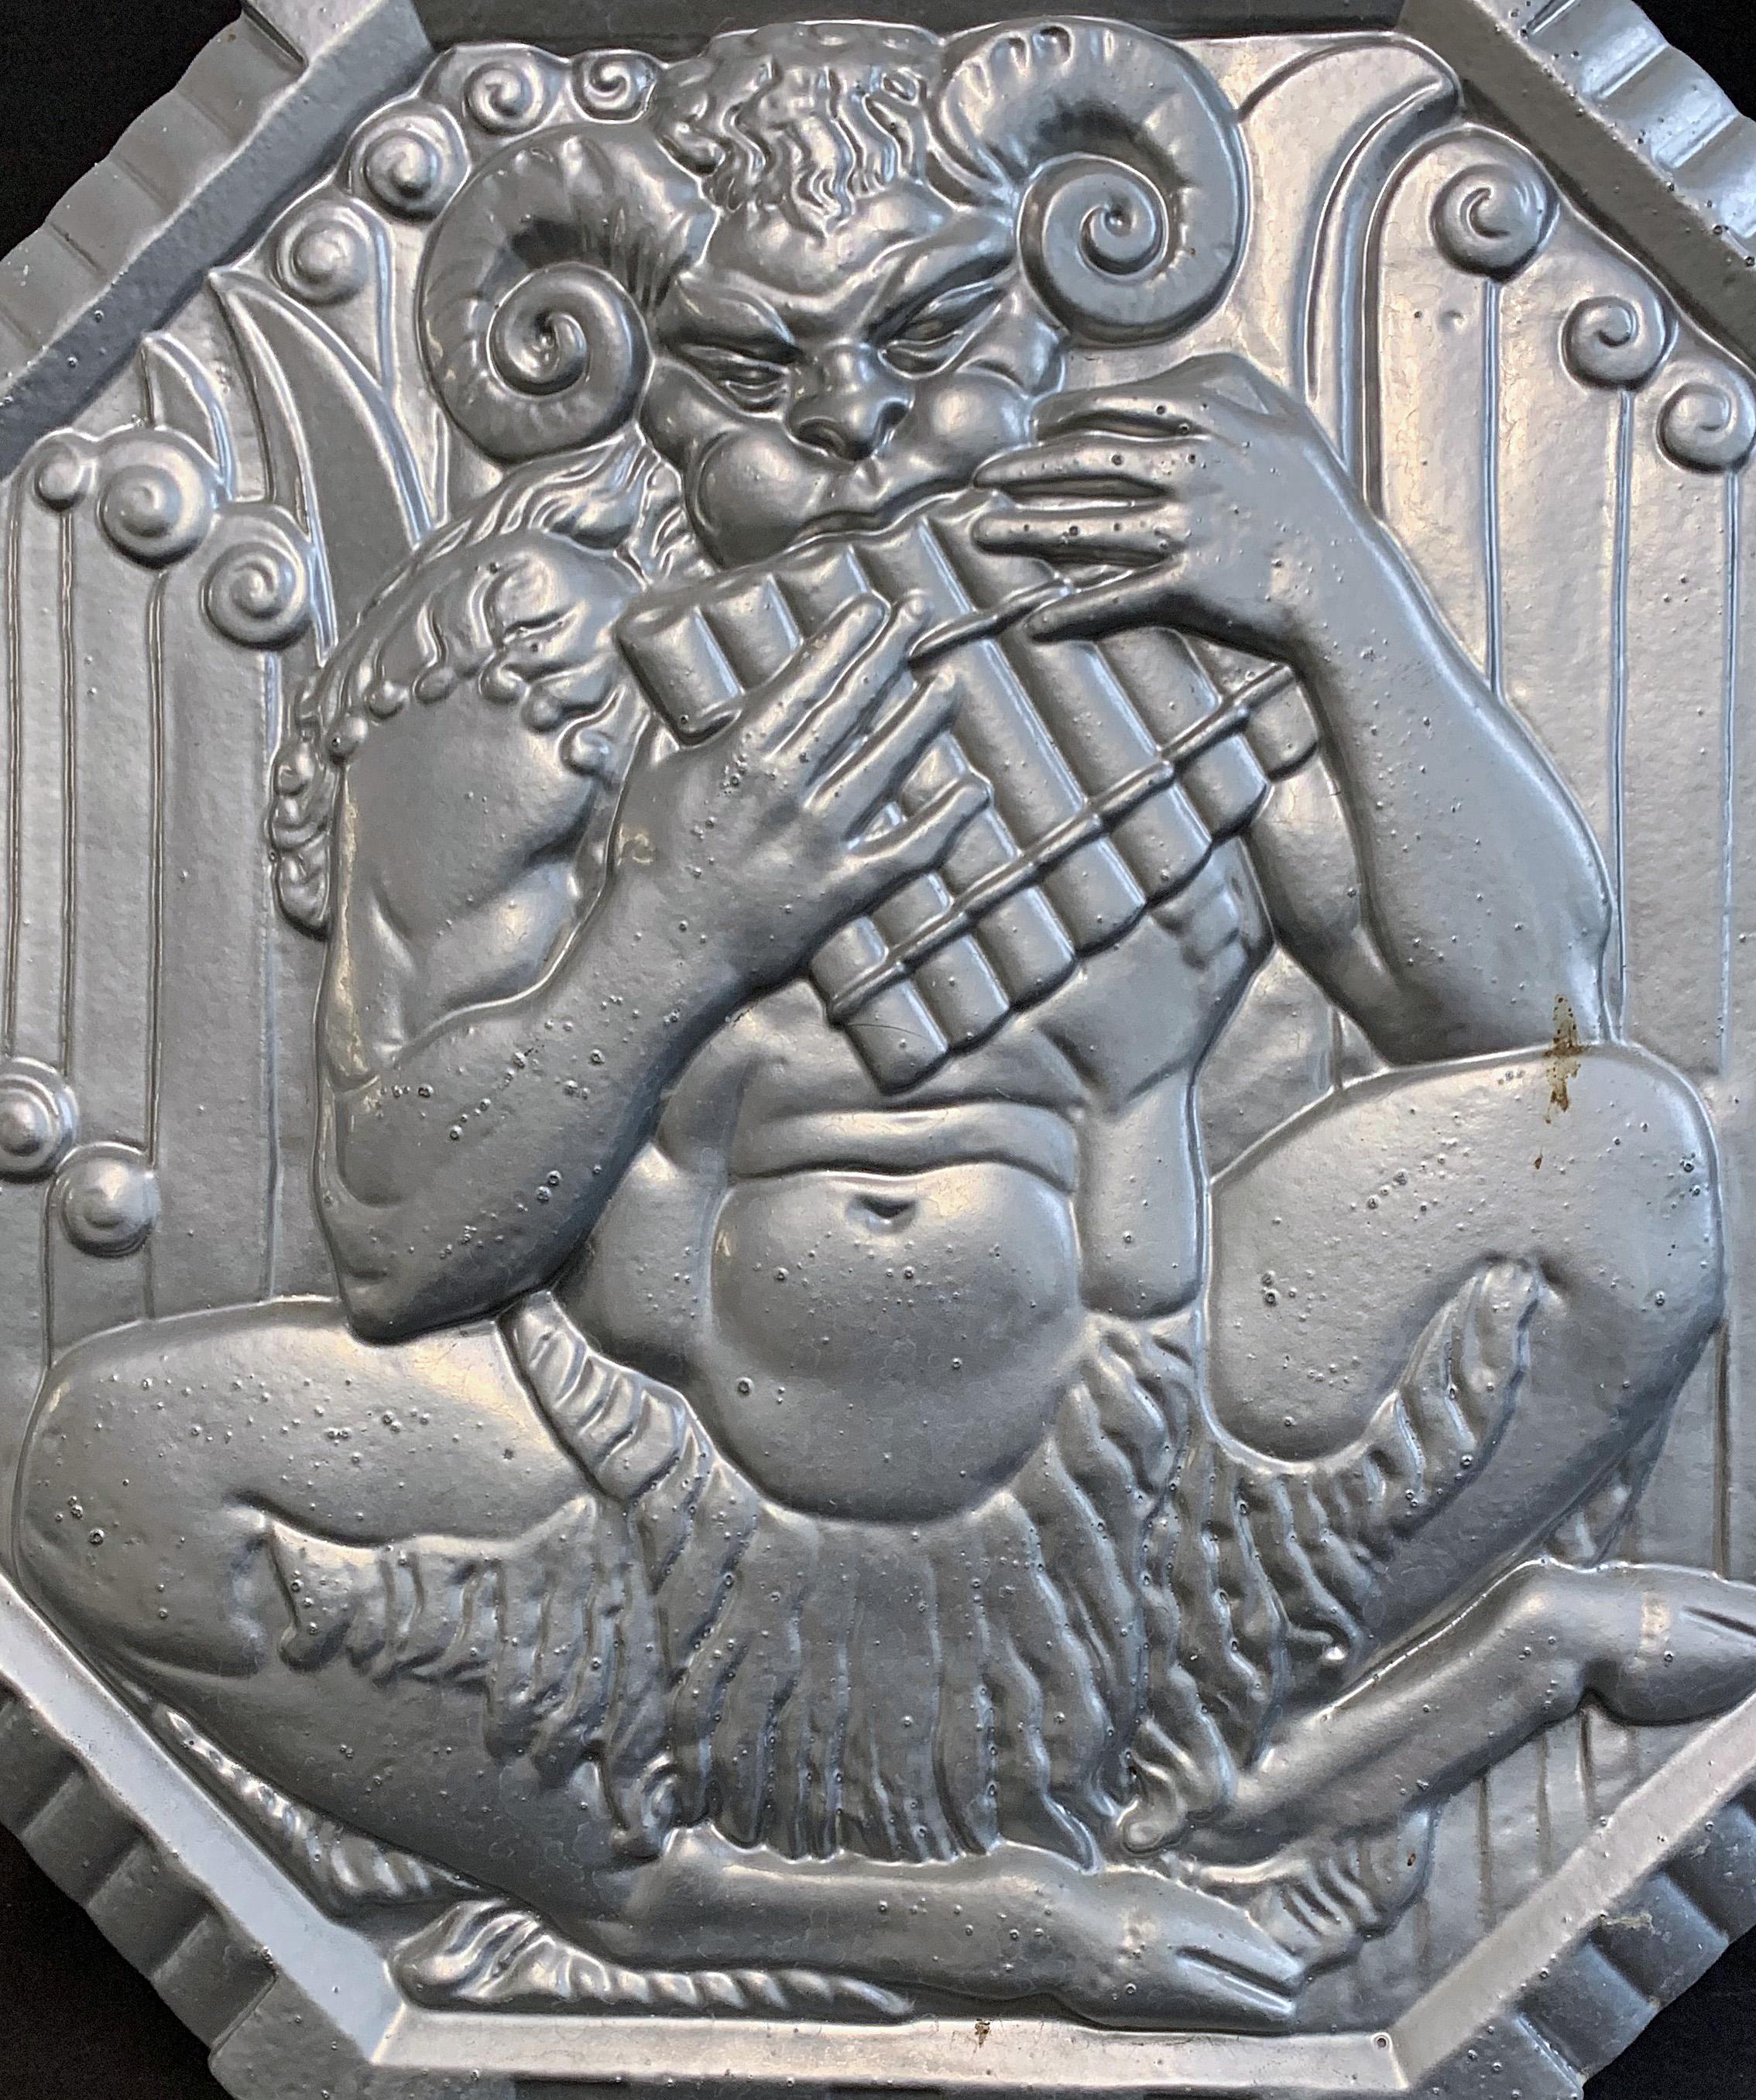 This rare and striking Art Deco bas relief panel, sculpted by Rene Chambellan, was commissioned and cast by the Aluminum Company of America, which we now know as Alcoa, to promote aluminum as an artistic and architectural medium. Chambellan was one